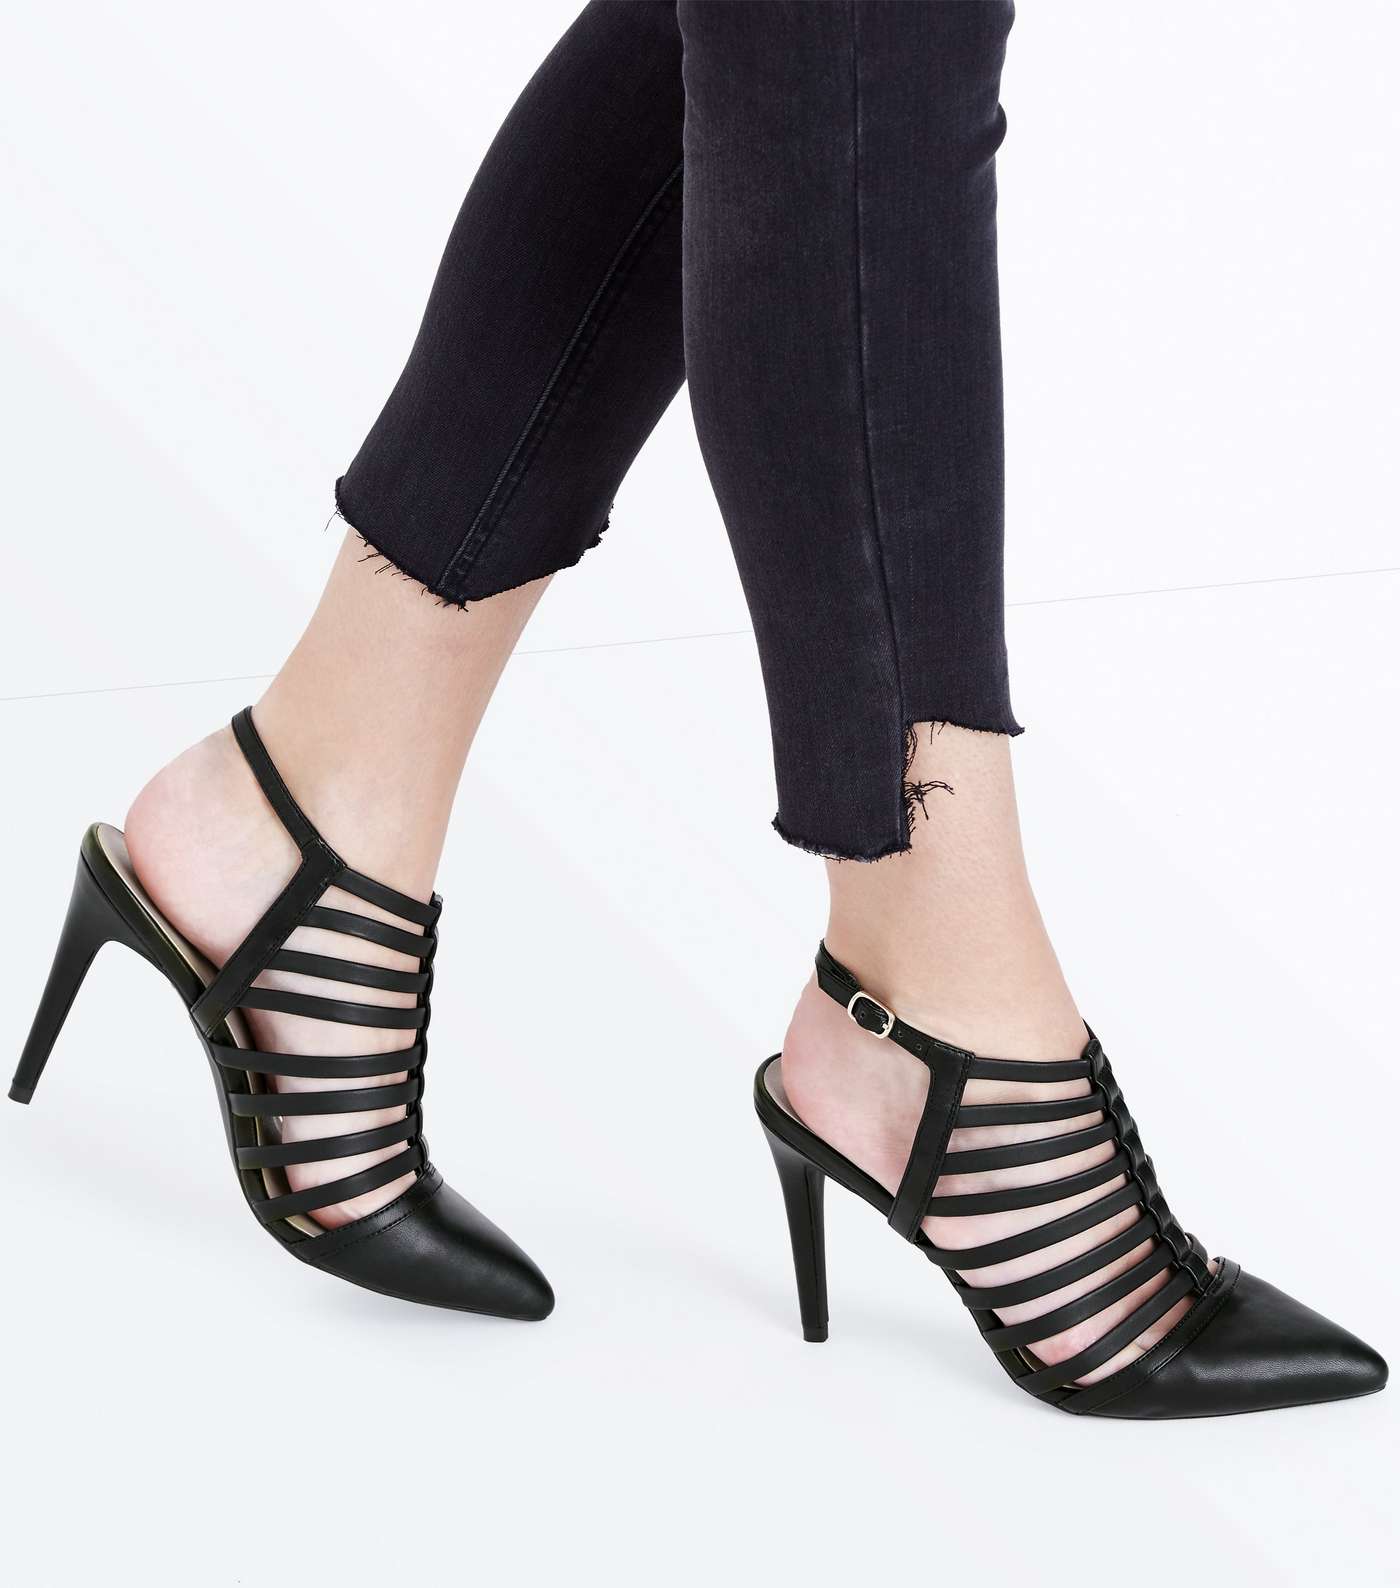 Black Pointed Caged Stiletto Heels Image 2